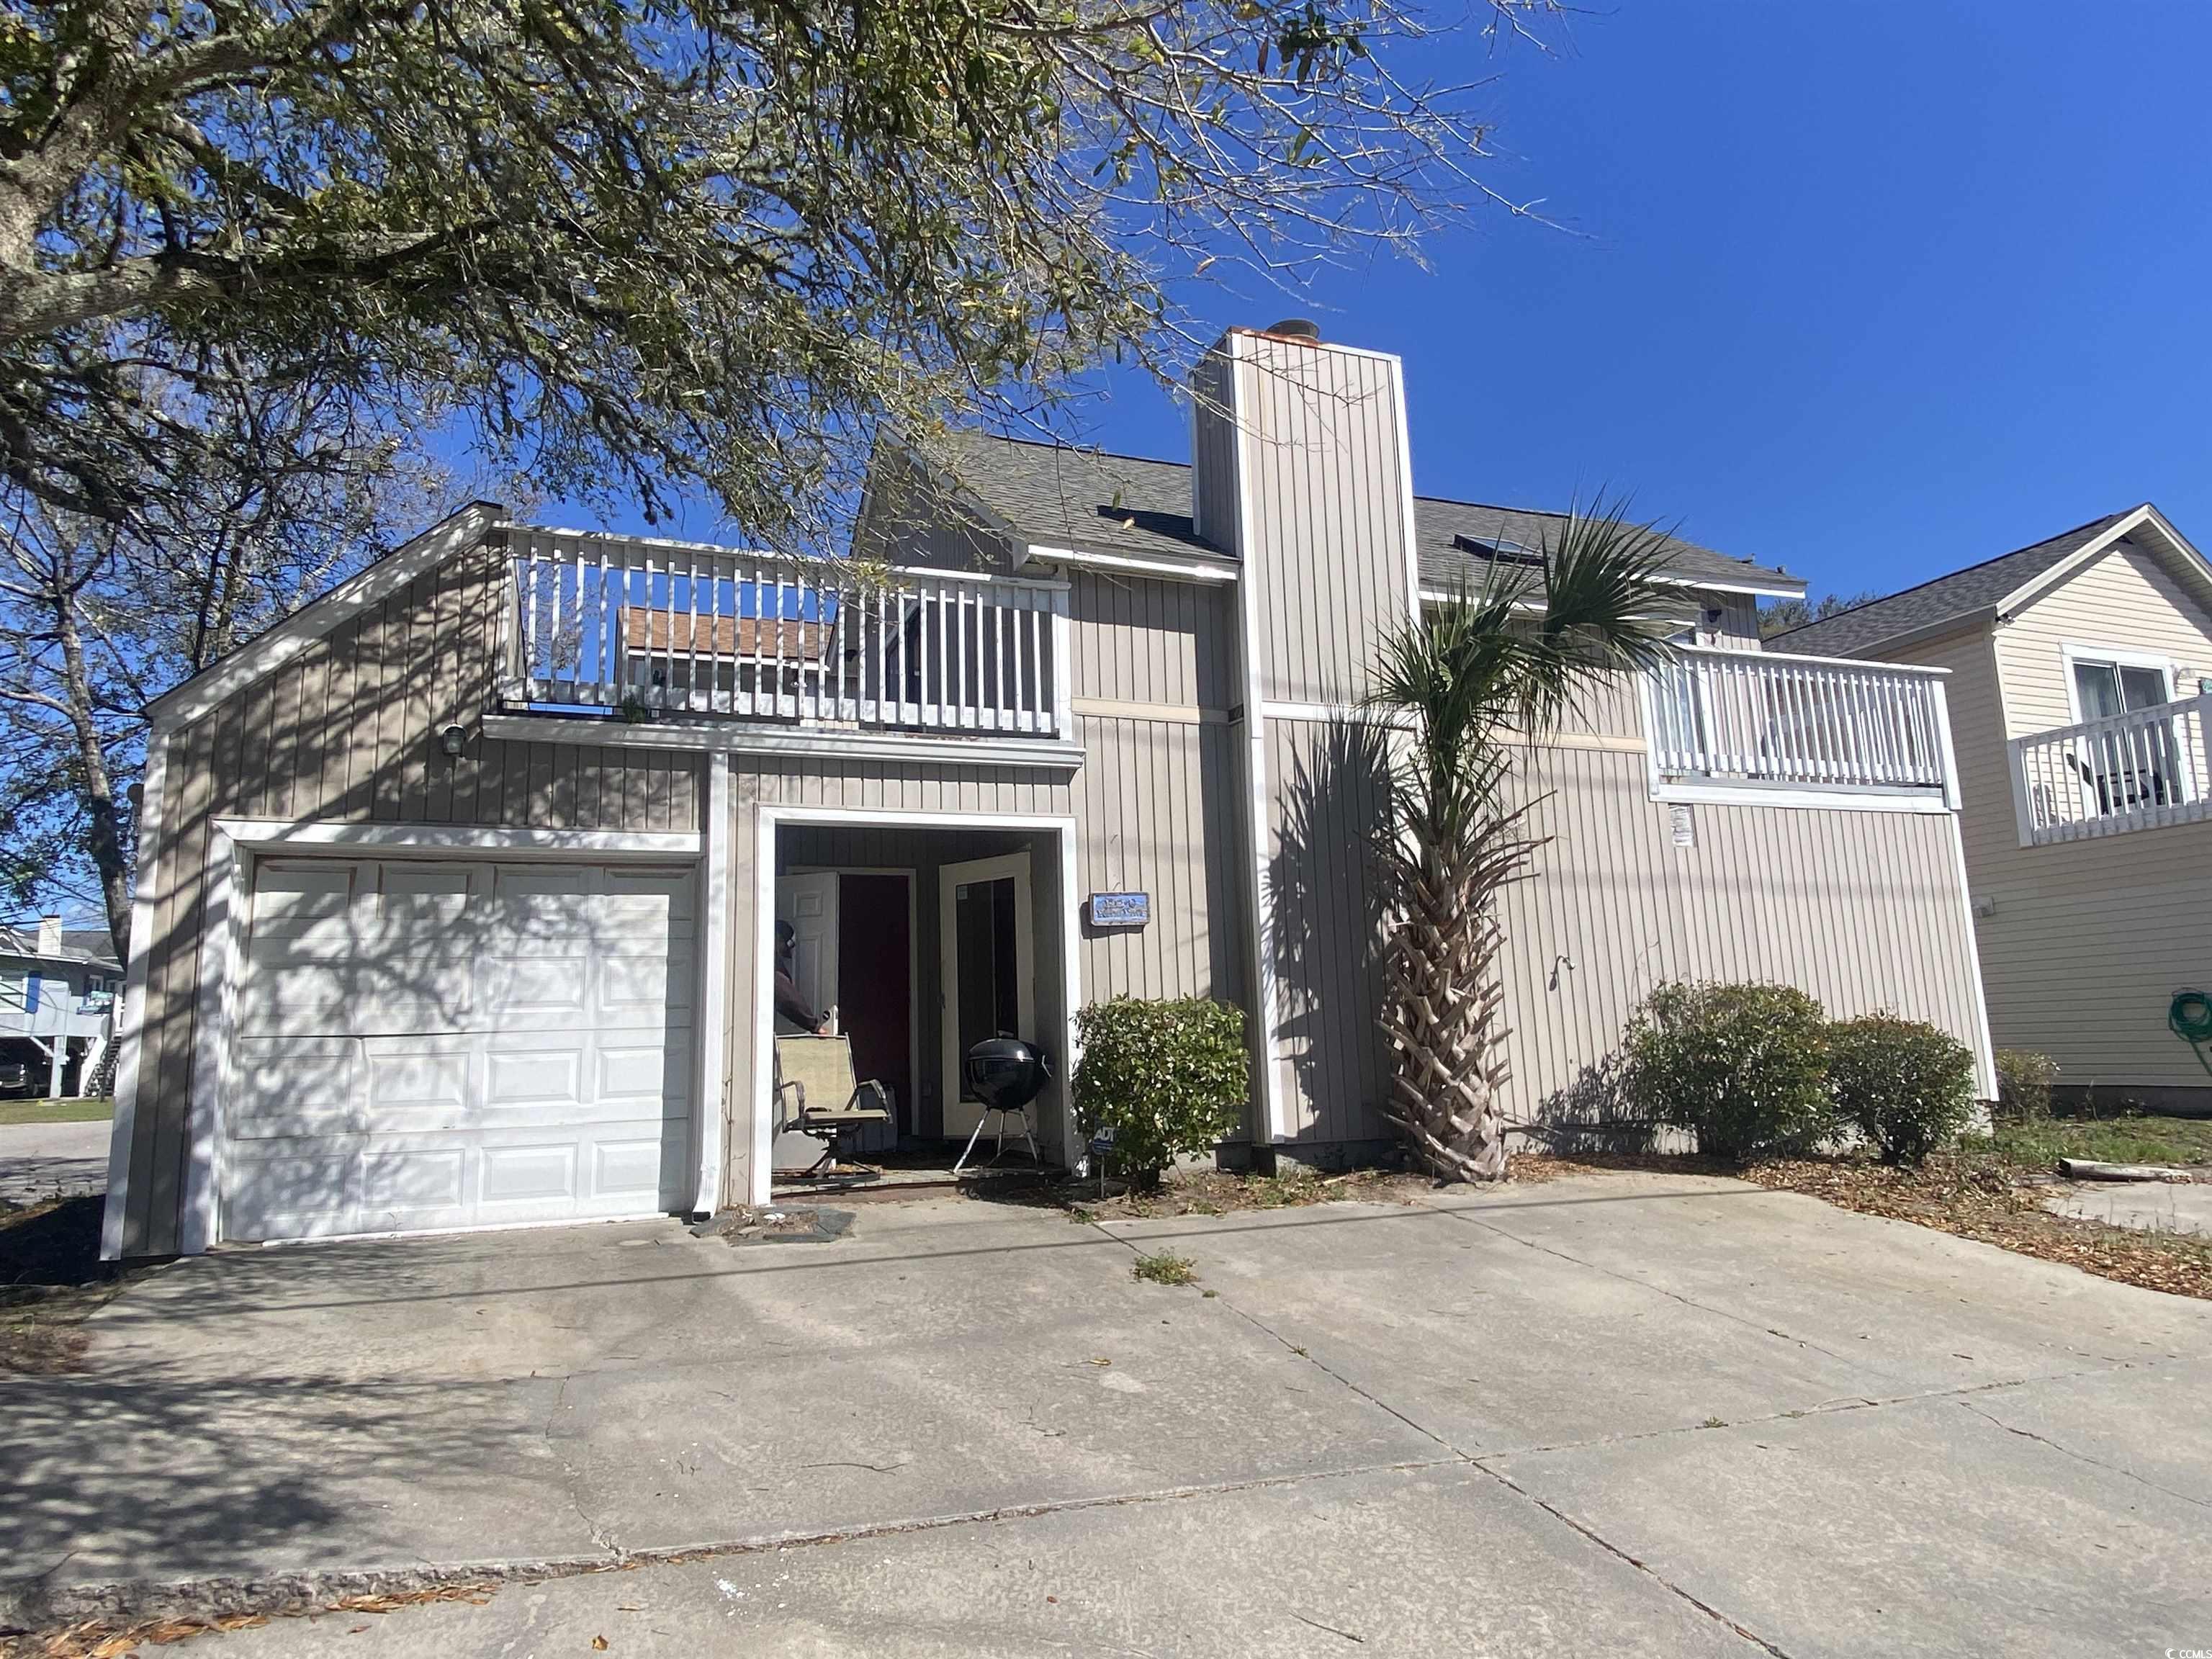 incredible location and investment opportunity! this home is just a short walk to the beach with great views from the deck and balcony! being sold as is and as seen!  no hoa.